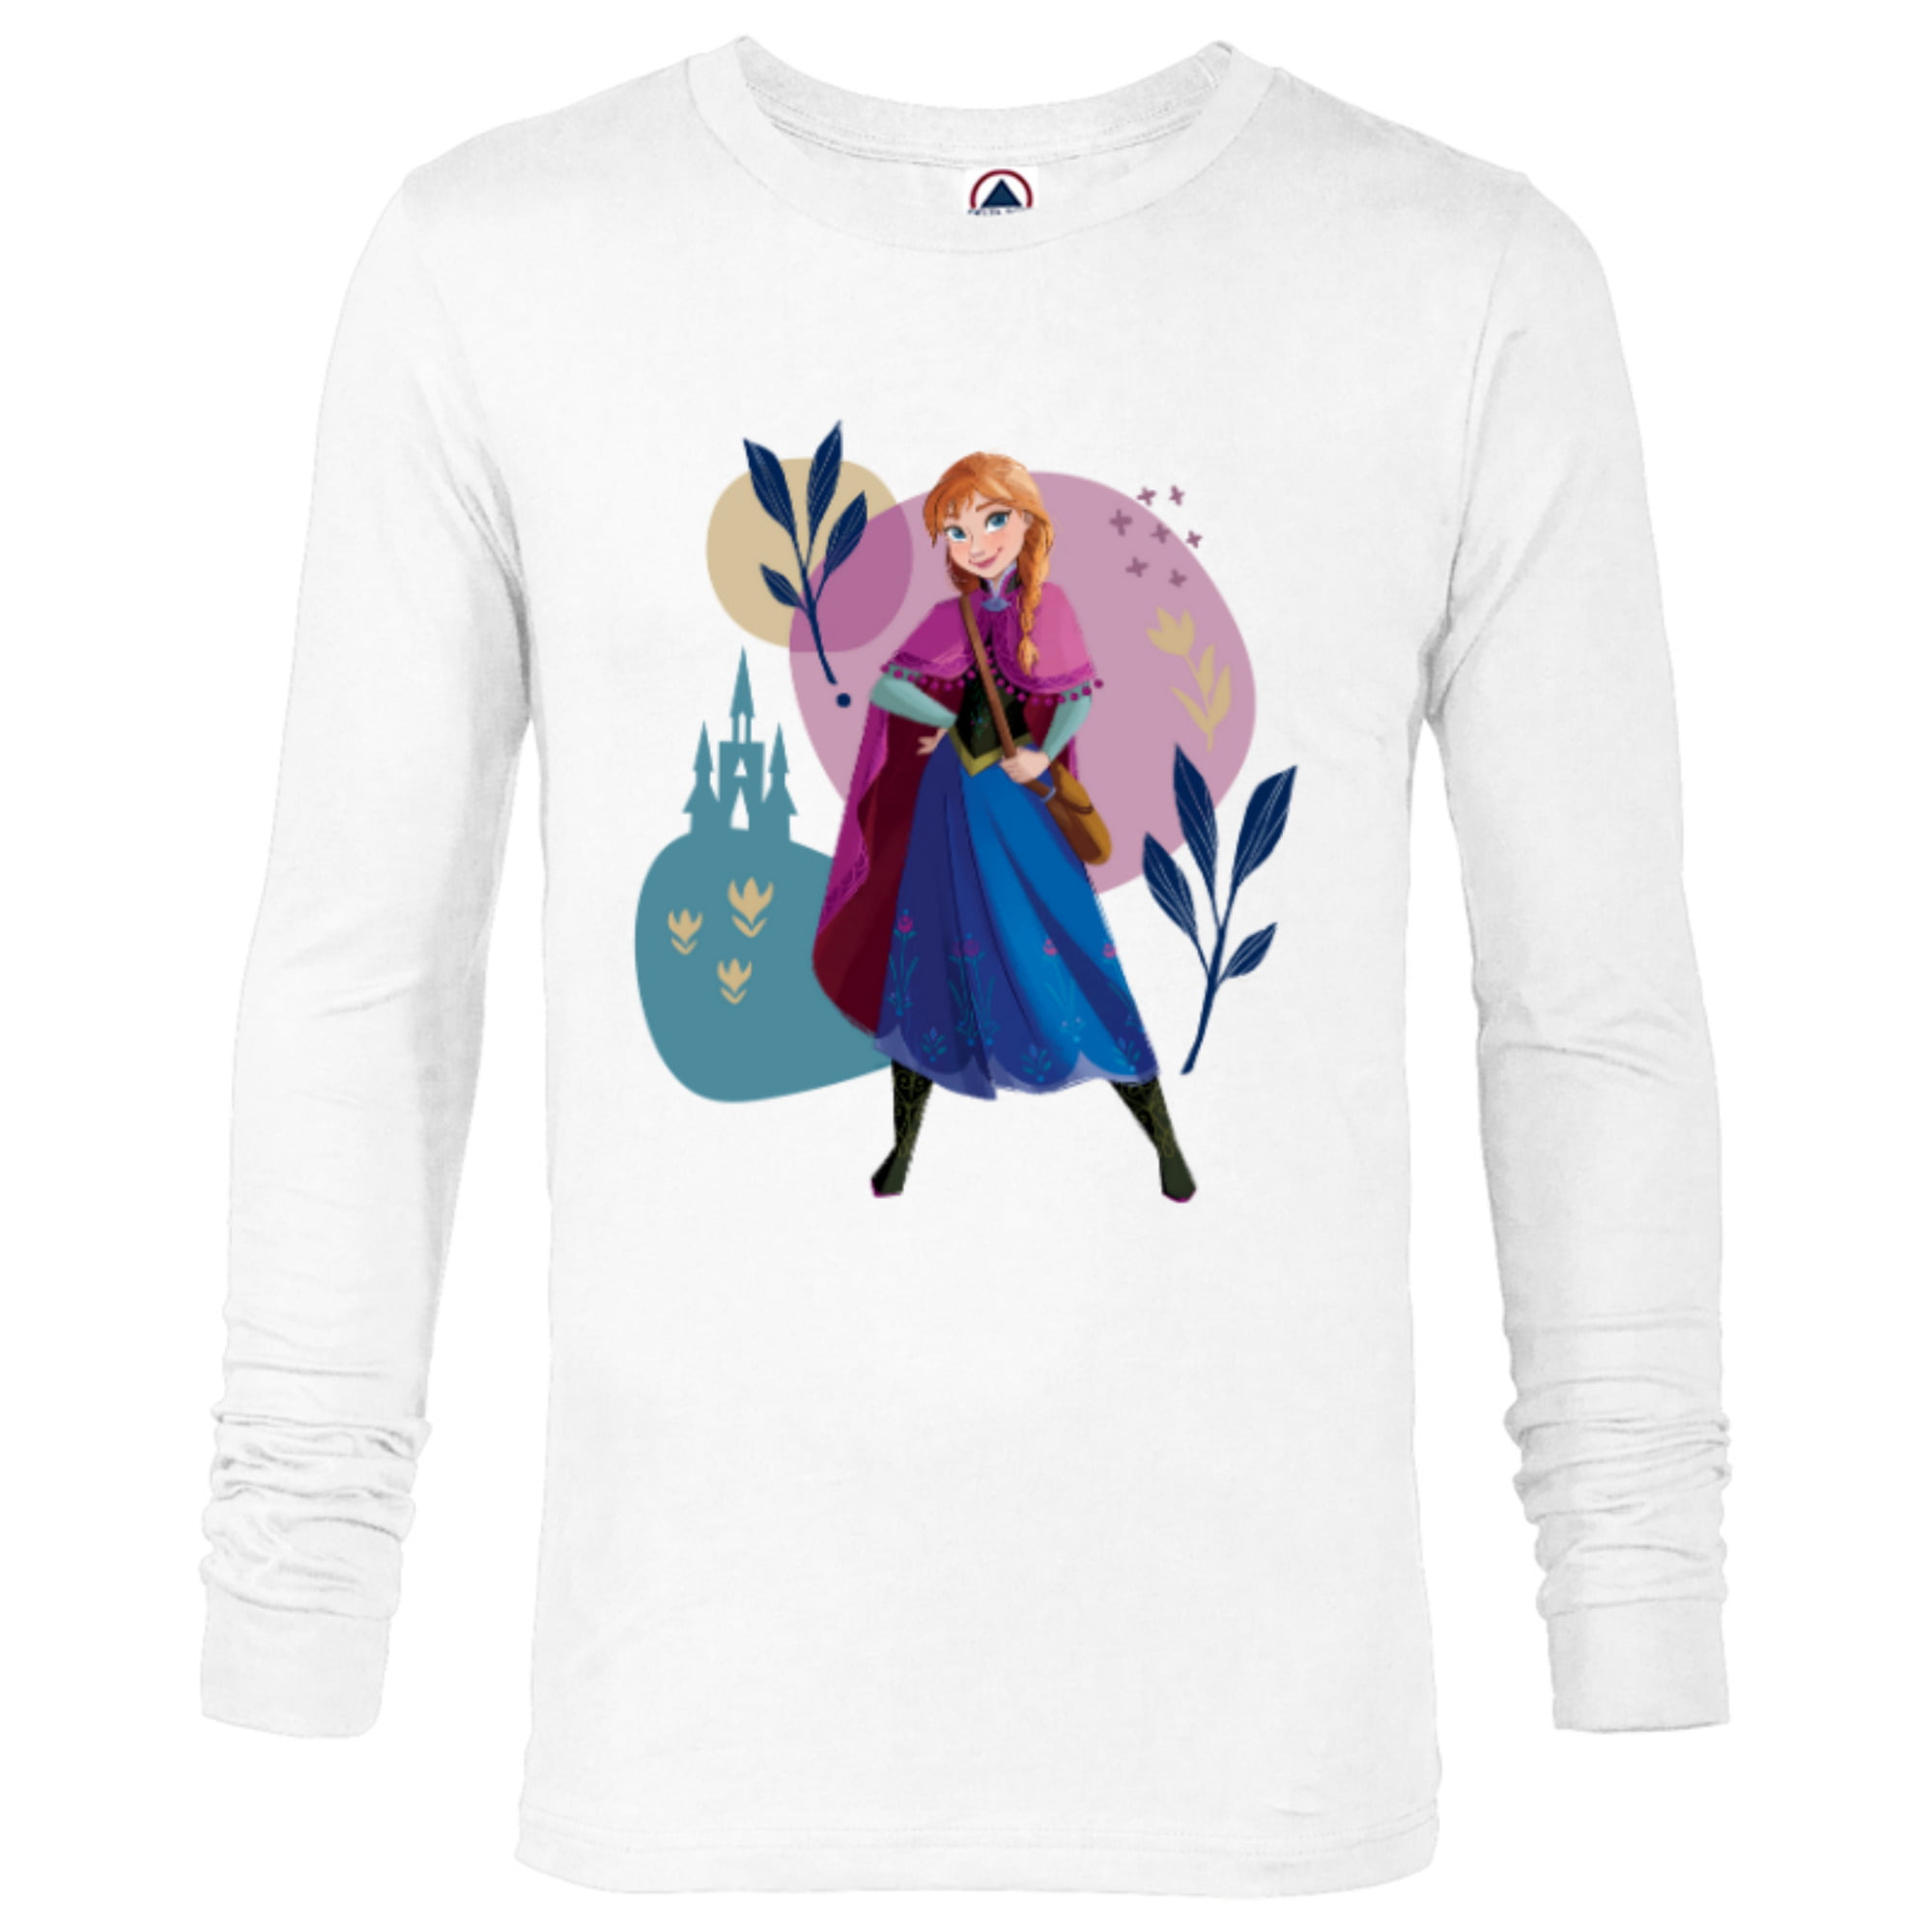 Disney Frozen Princess Anna of for Sleeve T-Shirt Arendelle - Men Long Customized-Athletic - Heather